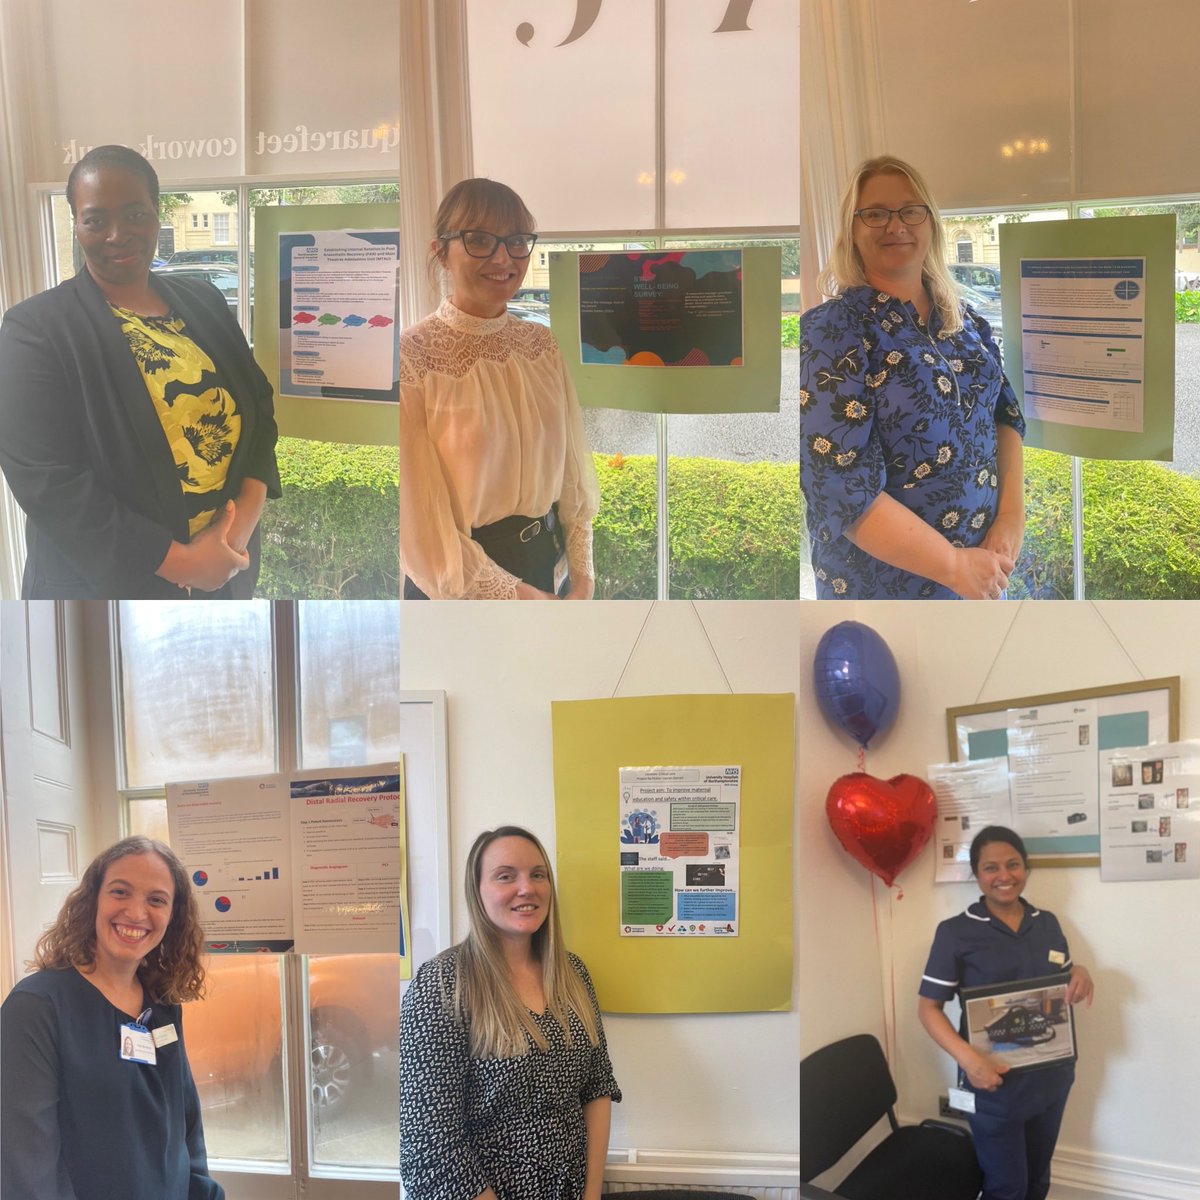 This afternoons brilliant poster presentations from our staff on the completion of their clinical leadership course. Amazing QI projects across our services such passion in the room to improve ⁦@NGHnhstrust⁩ ⁦@NereaOdongoNGH⁩ ⁦@JoSmithngh⁩ ⁦@HeidiSmoult⁩